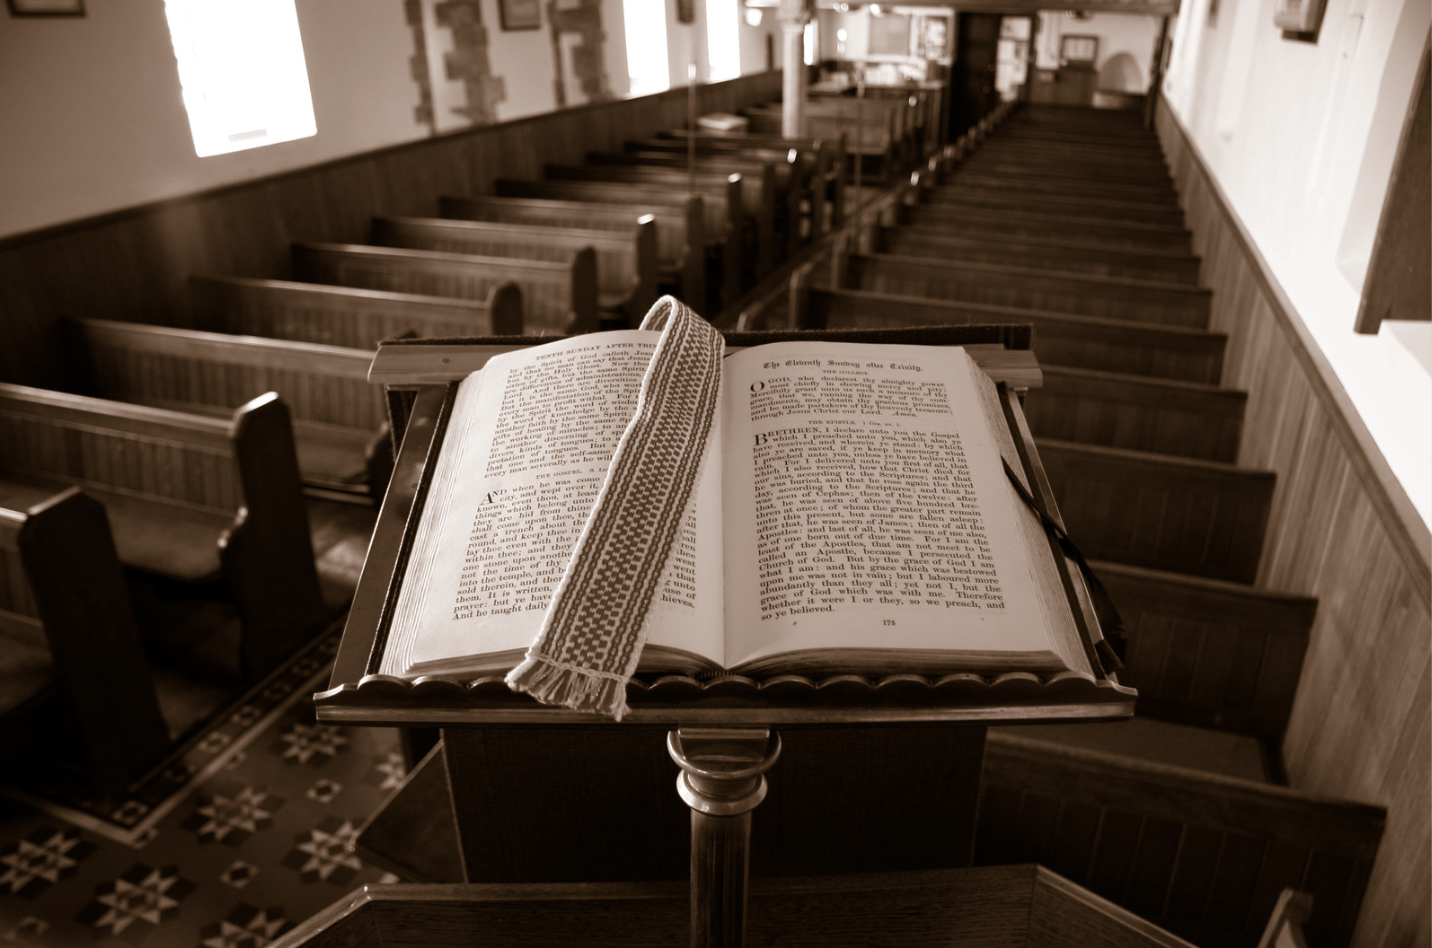 A picture of the church interior with an opened Bible on the podium